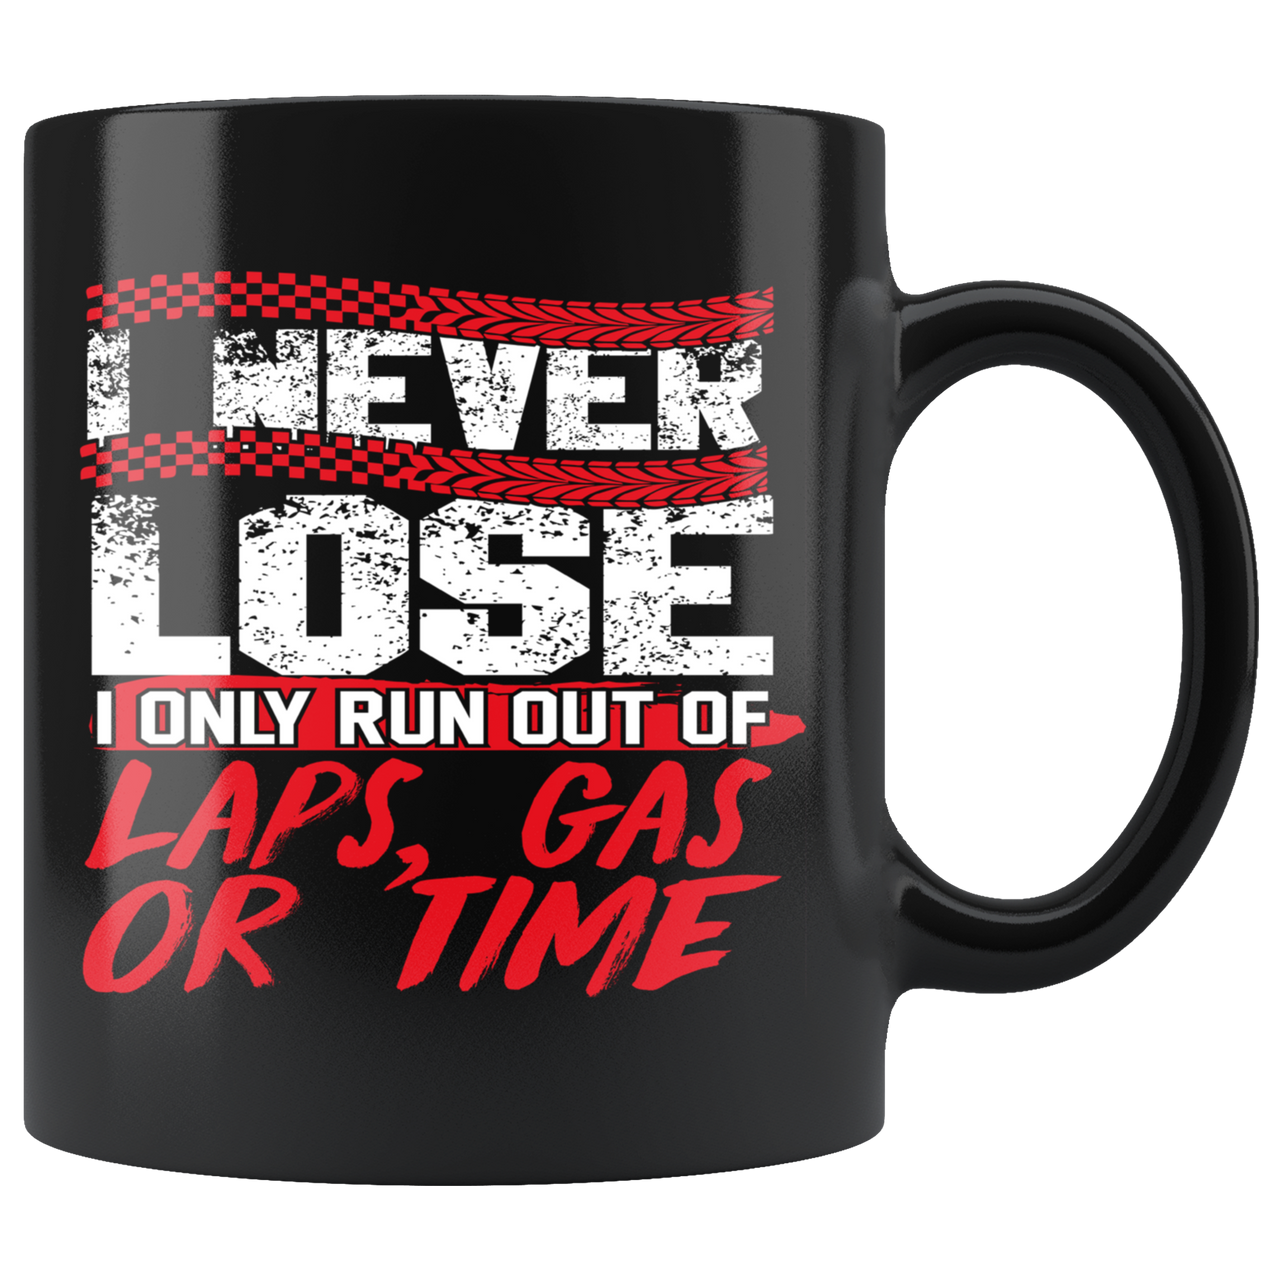 I Never Lose I Only Run Out Of Laps, Gas Or Time Mug!